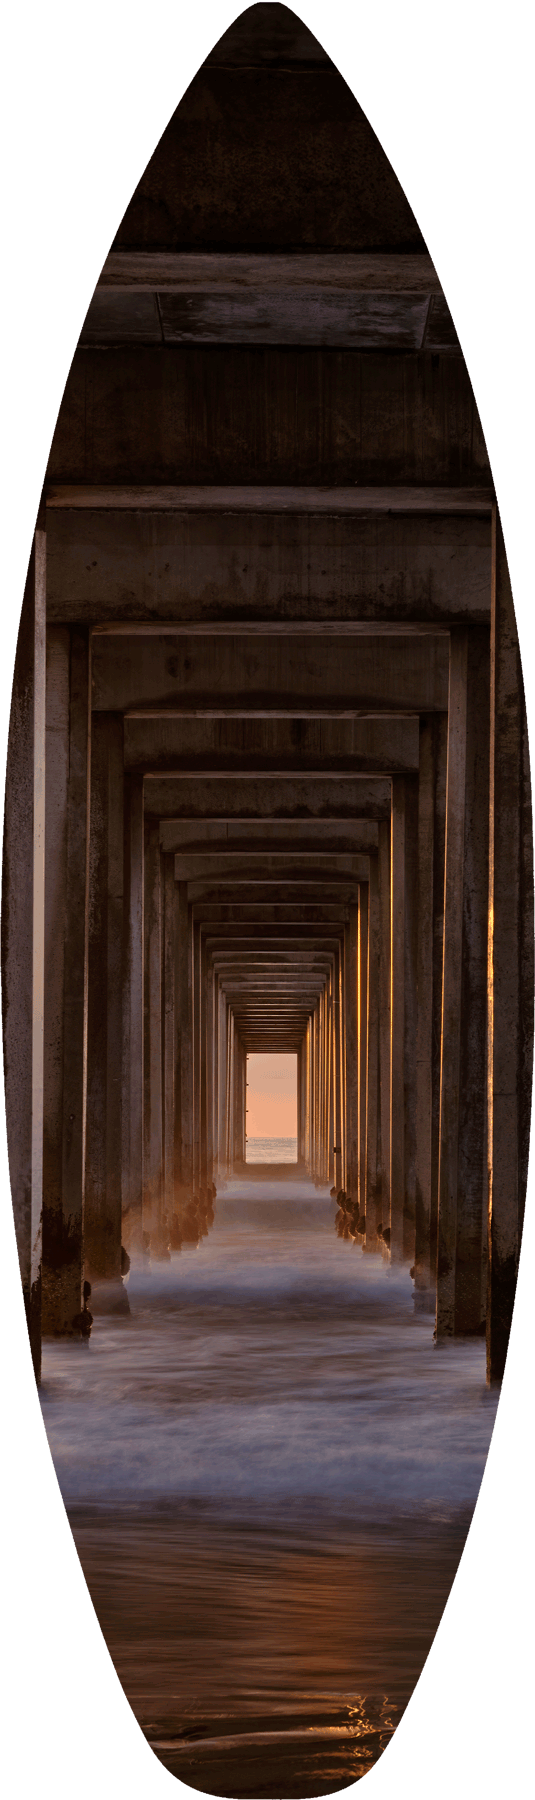 an abstract portal view printed on a surfboard down the iconic Scripps Pier in La Jolla, California taken by fine art landscape photographer Andrew Shoemaker